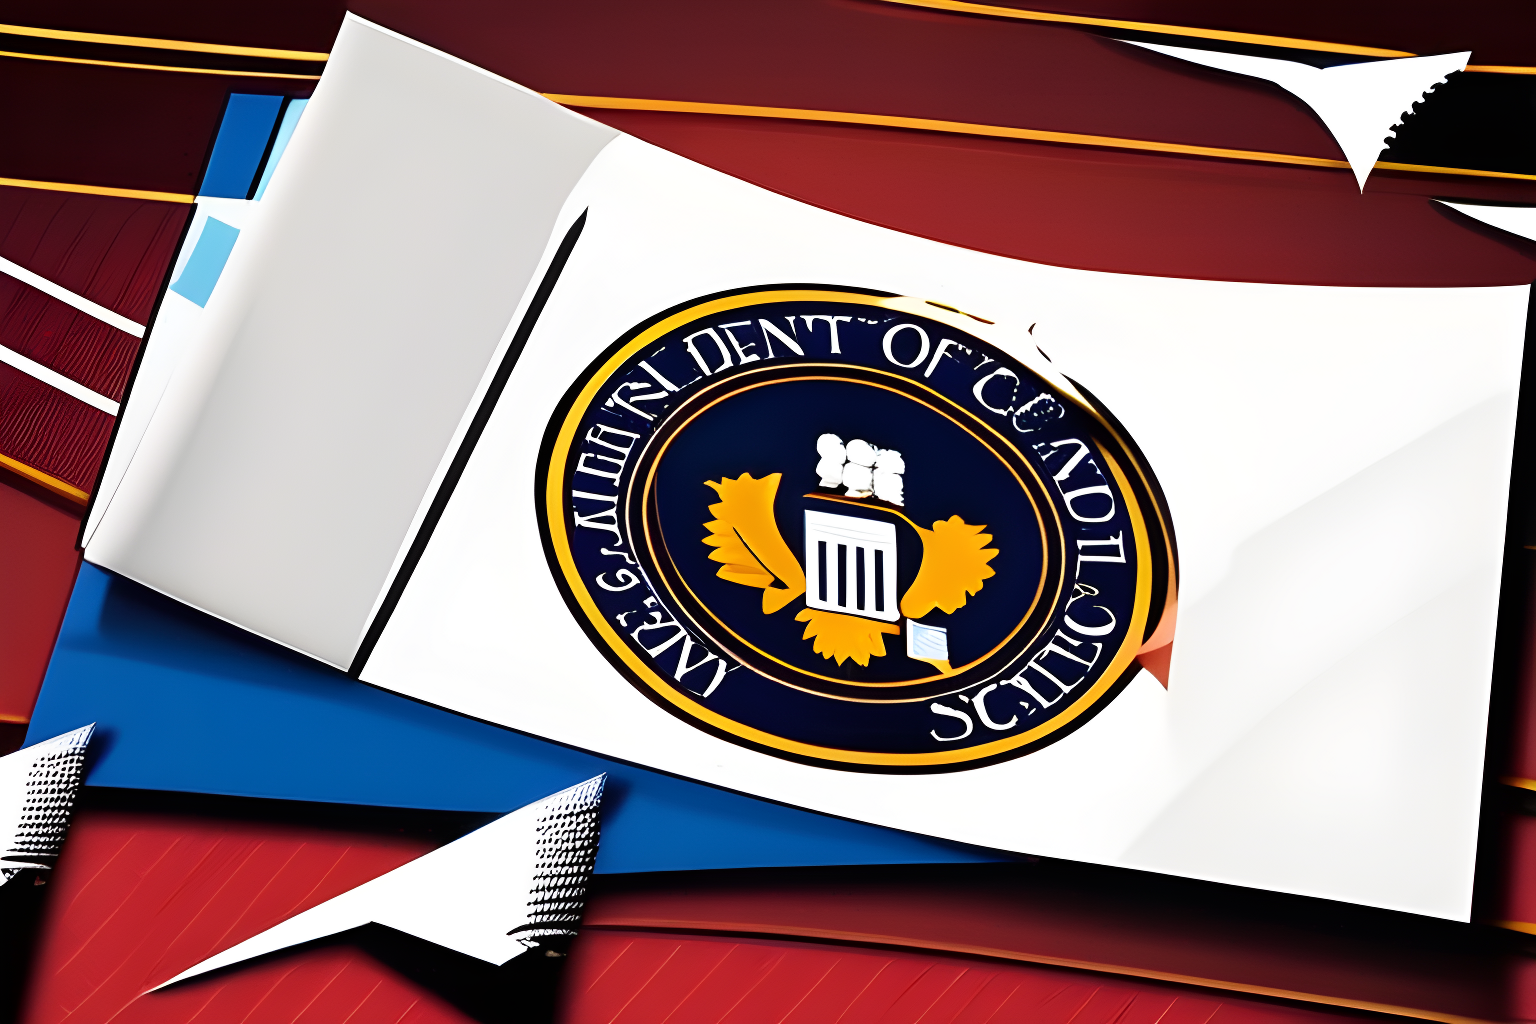 Illustrate a document, with the SEC's crest, being ripped to shreds